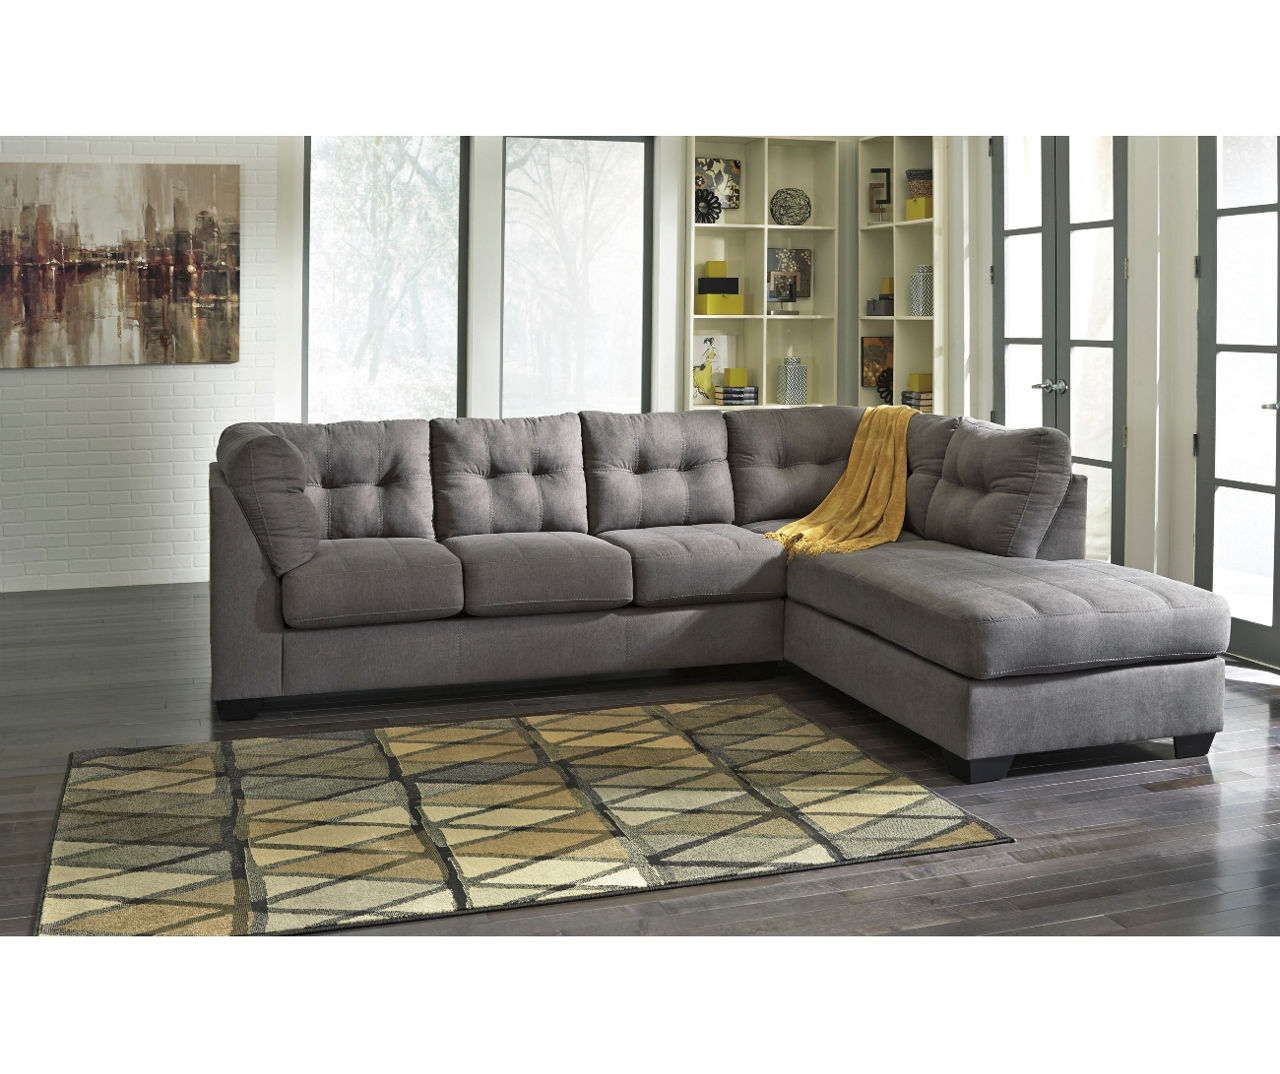 Signature Design By Ashley Maier Charcoal Sectional with Right-Facing Chaise